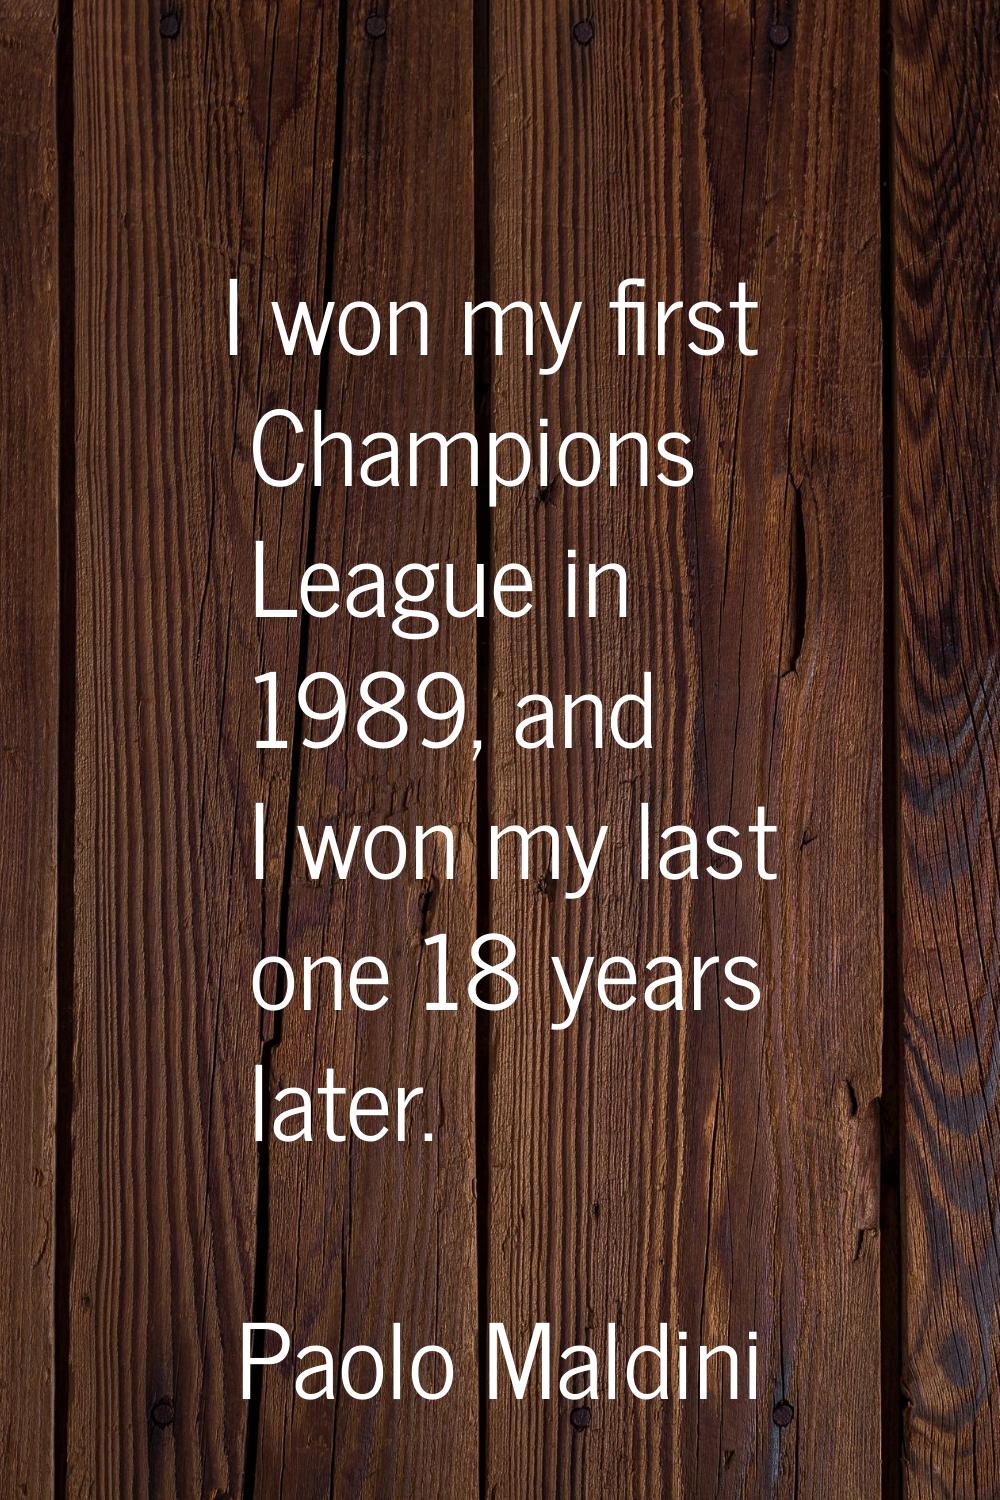 I won my first Champions League in 1989, and I won my last one 18 years later.